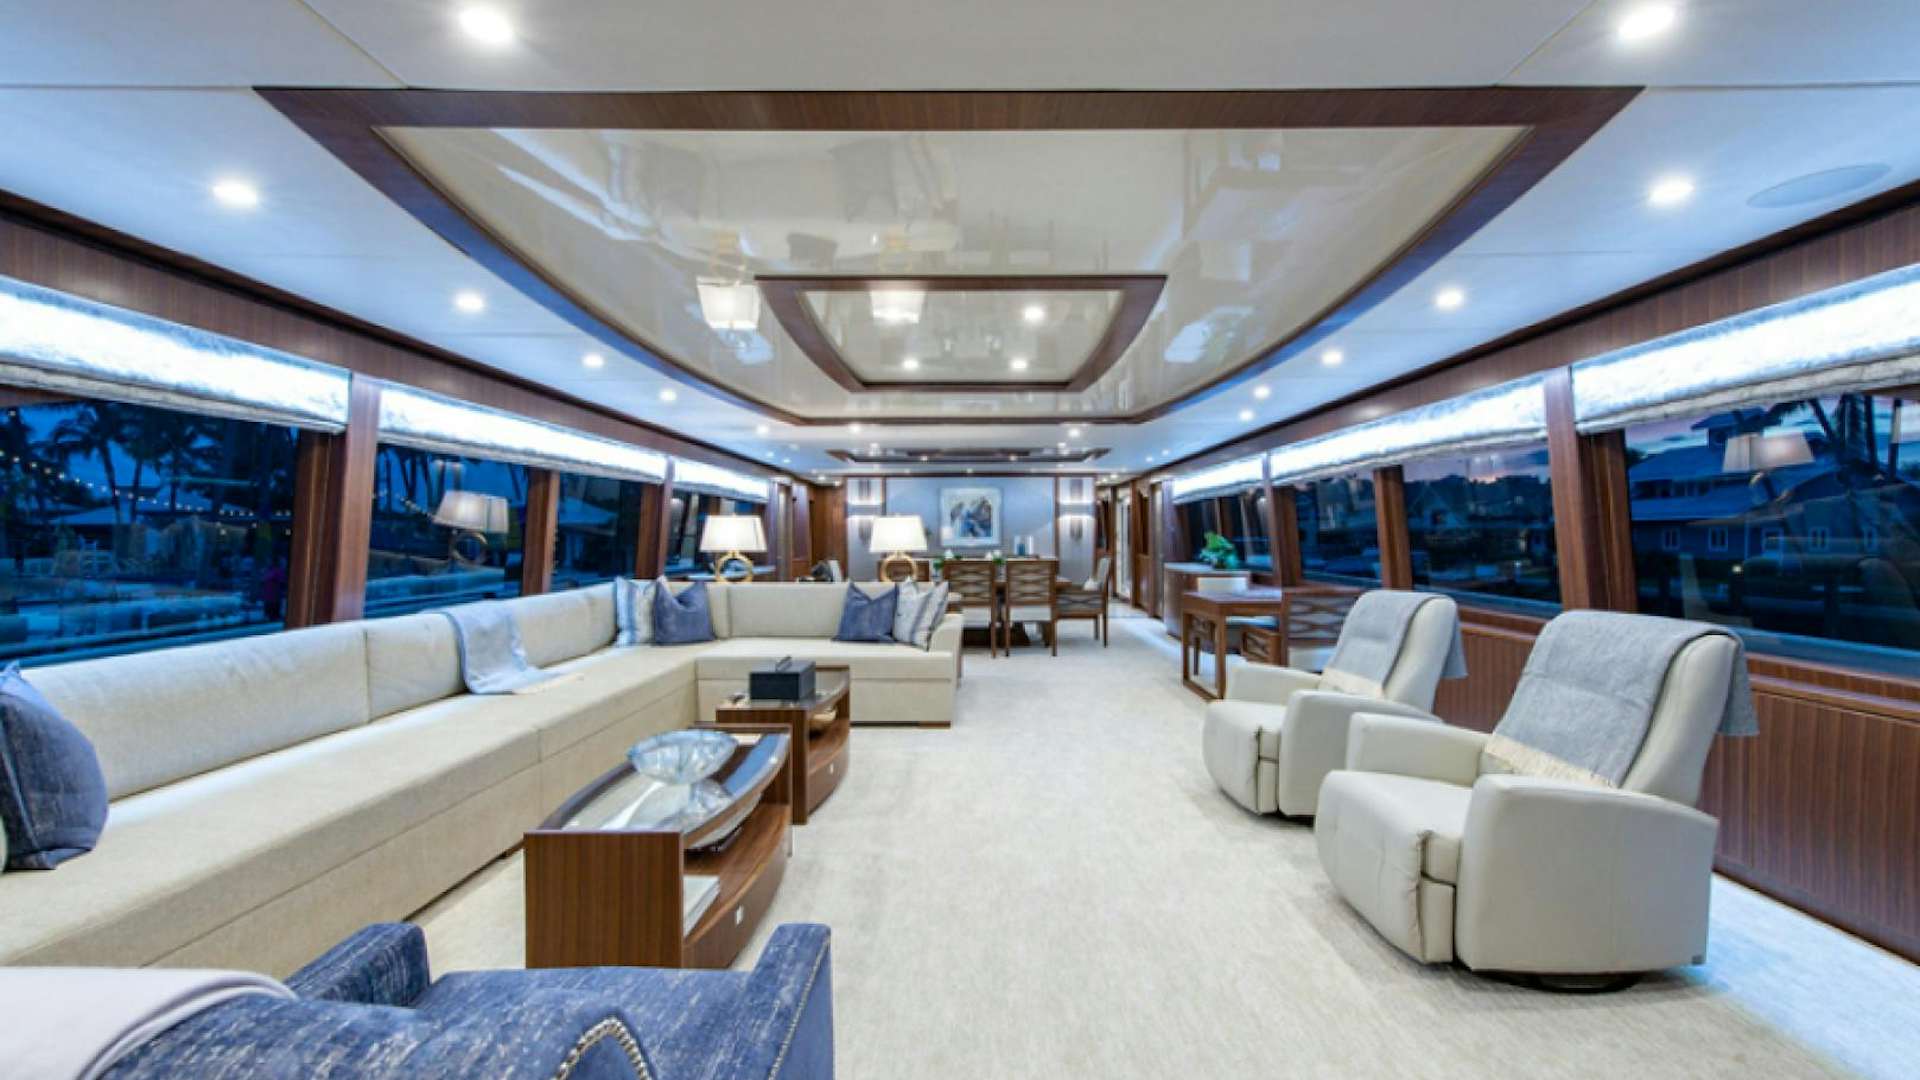 Congvoyage
Yacht for Sale